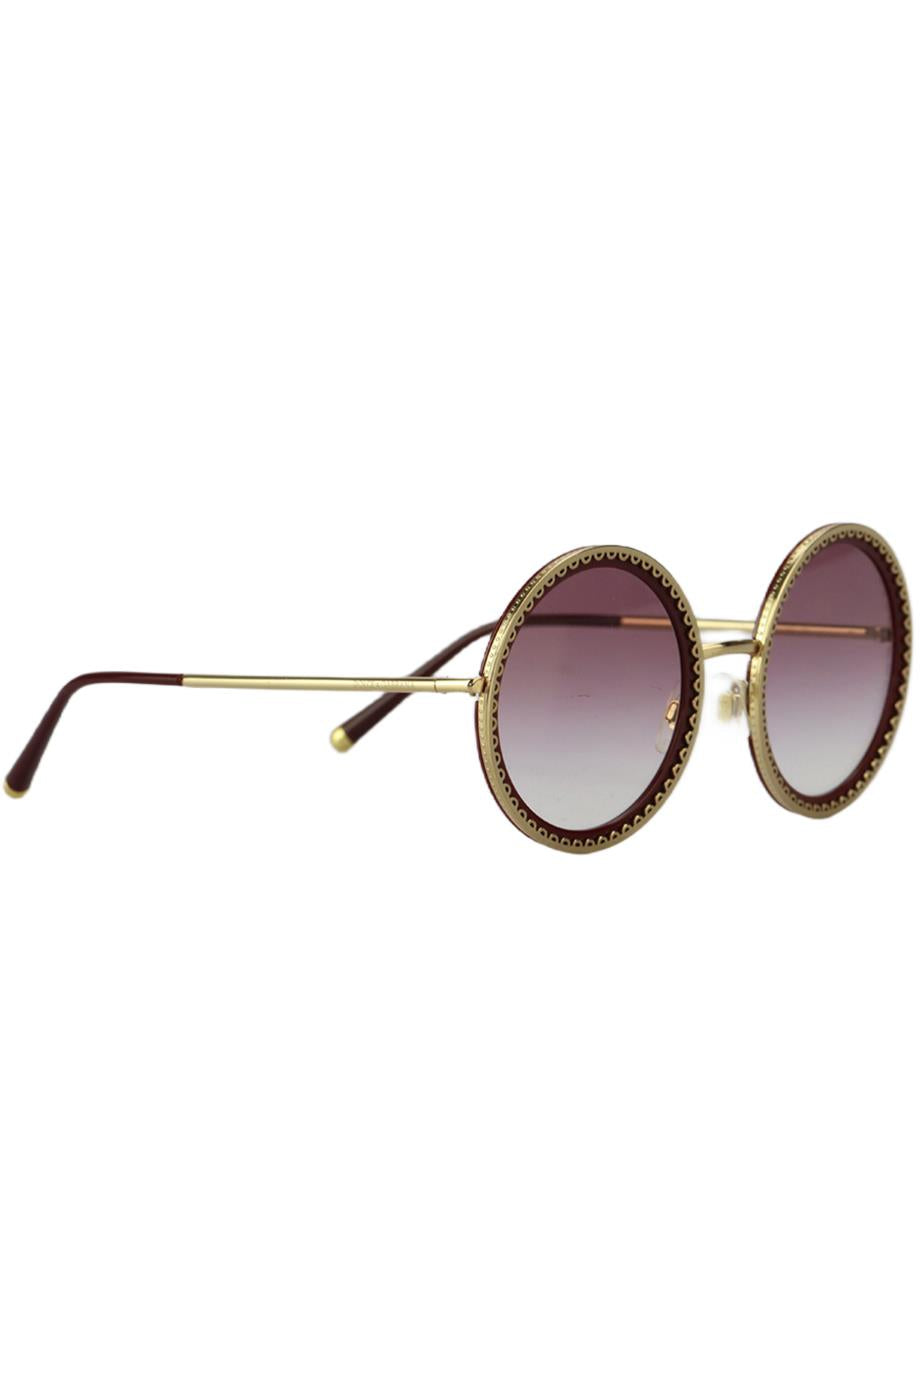 DOLCE AND GABBANA ROUND FRAME ACETATE AND GOLD TONE SUNGLASSES